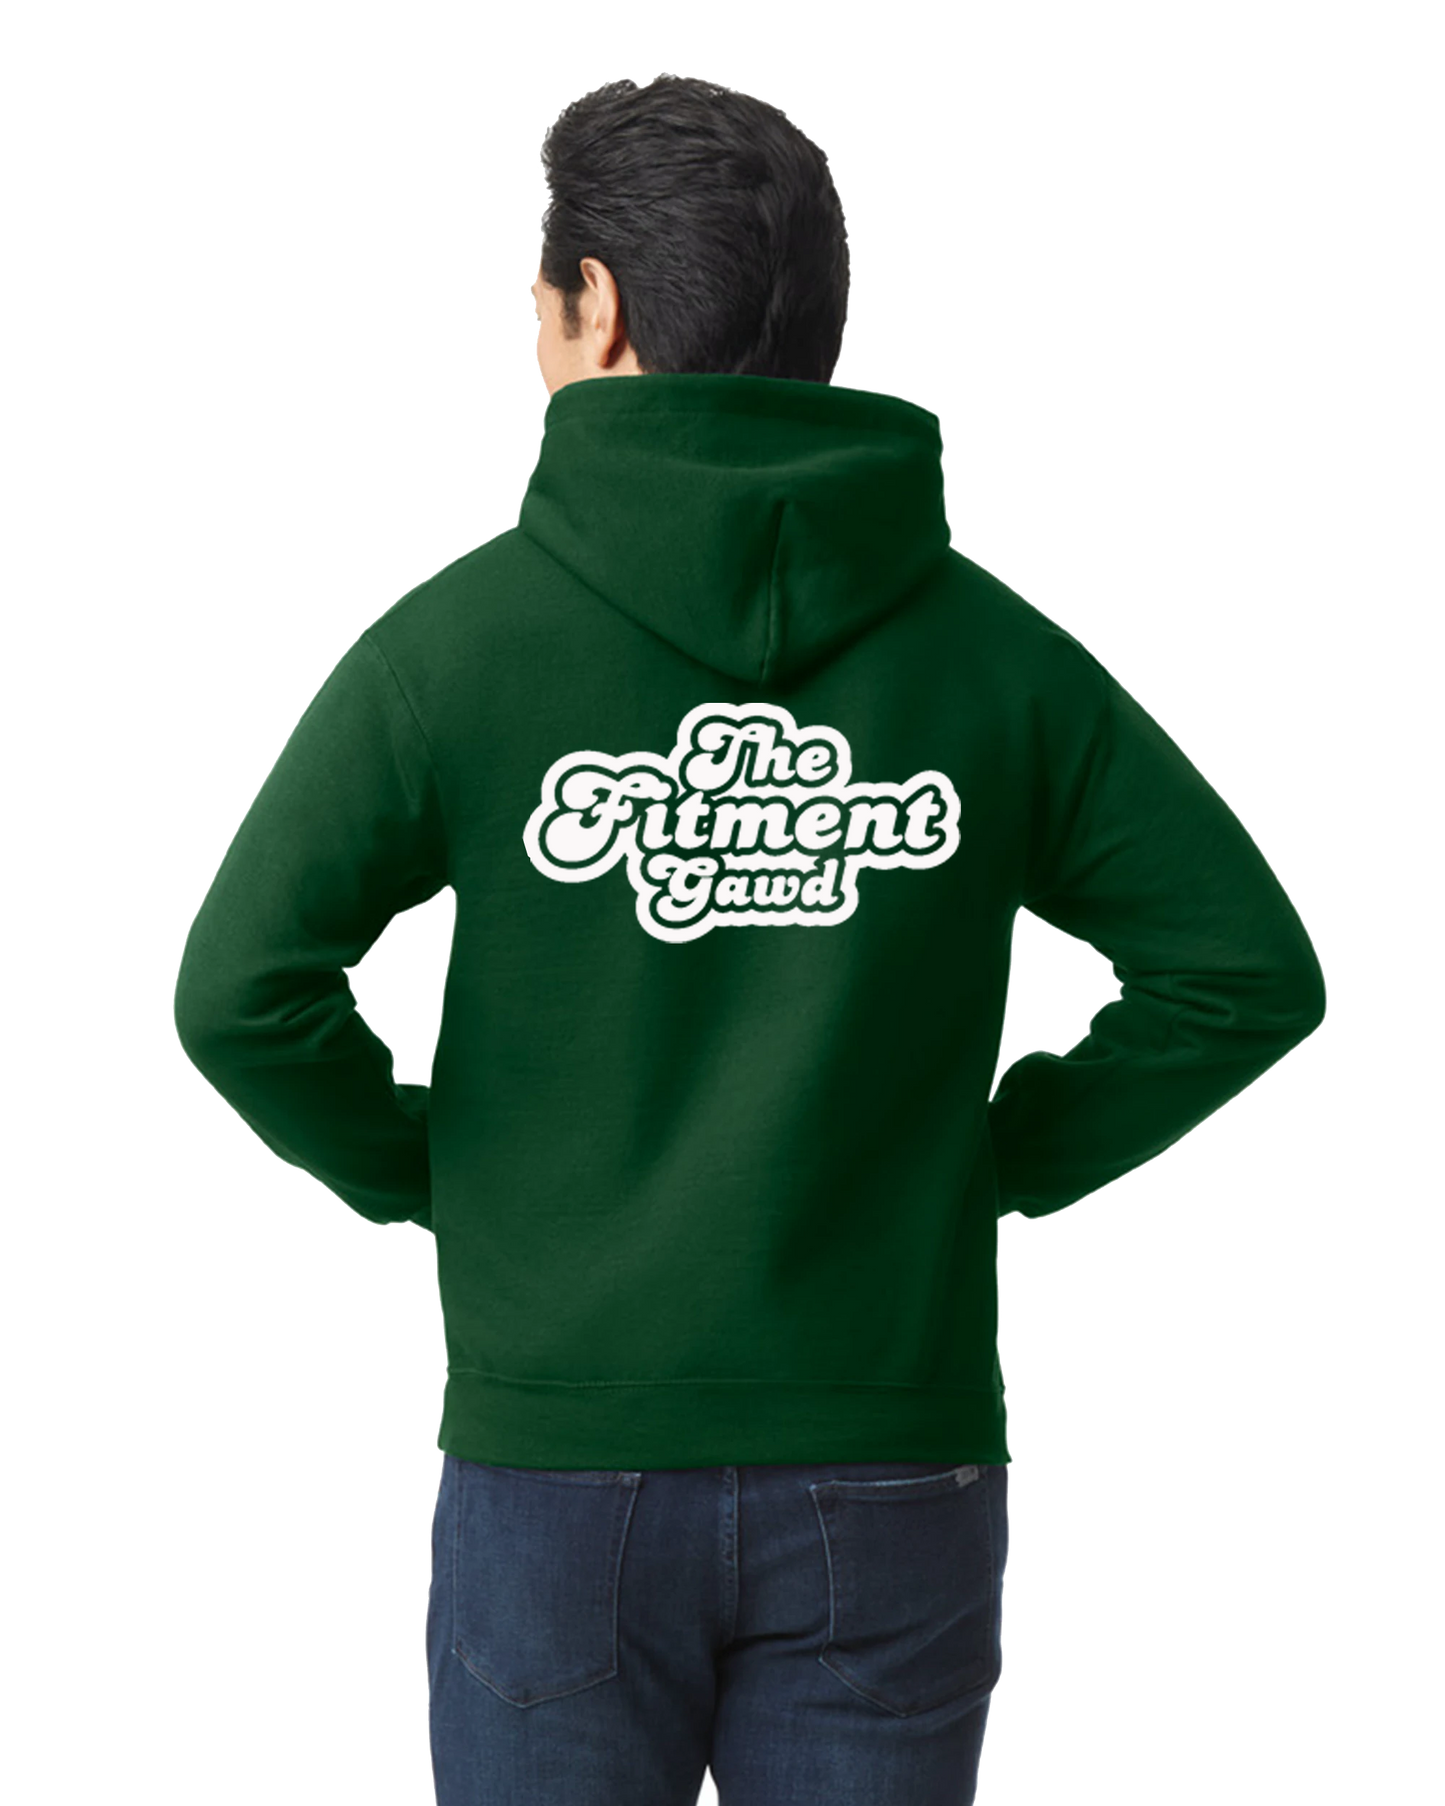 HOODIE into the world of timeless streetwear fashion wit HOODIE. This exclusive carefully crafted to provide a luxurious level of comfort and breathability that will last throughout the day. Its versatility allows